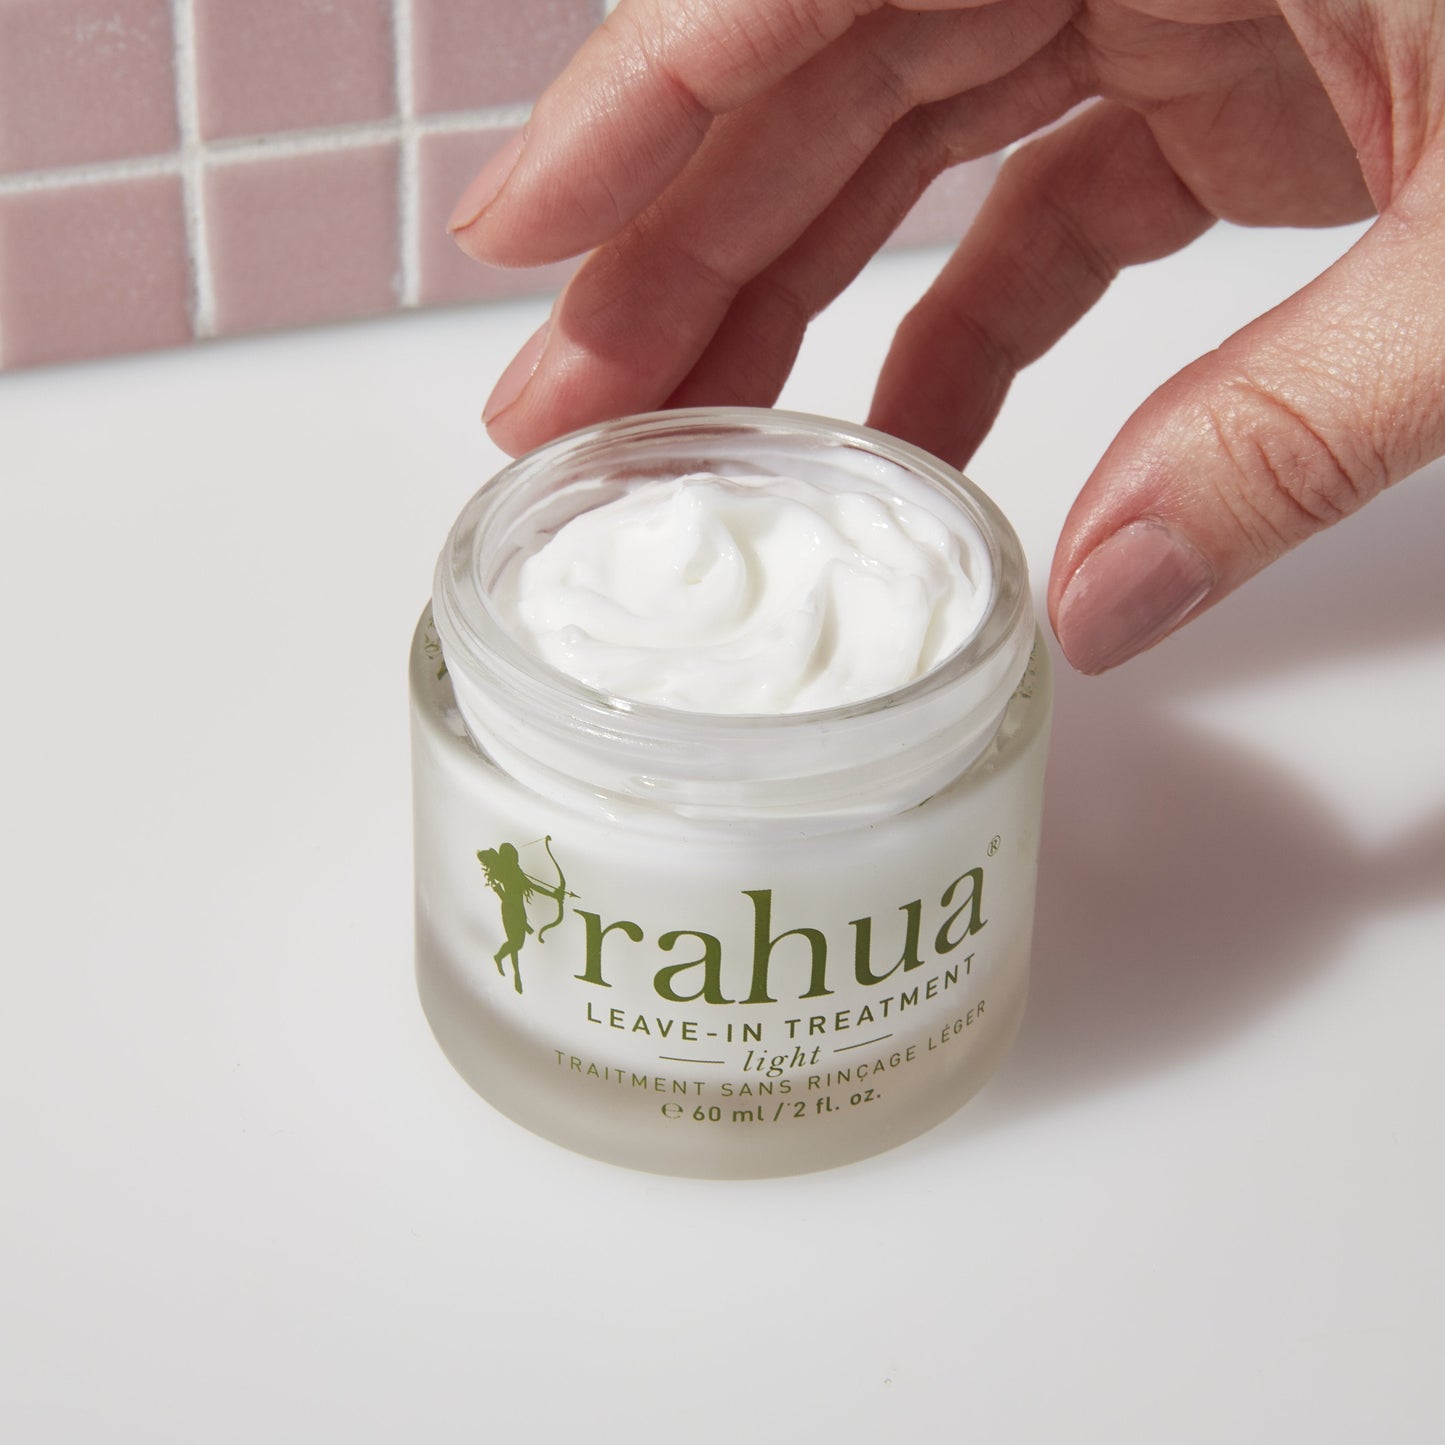 leave in treatment light with its creamy texture spread in the background